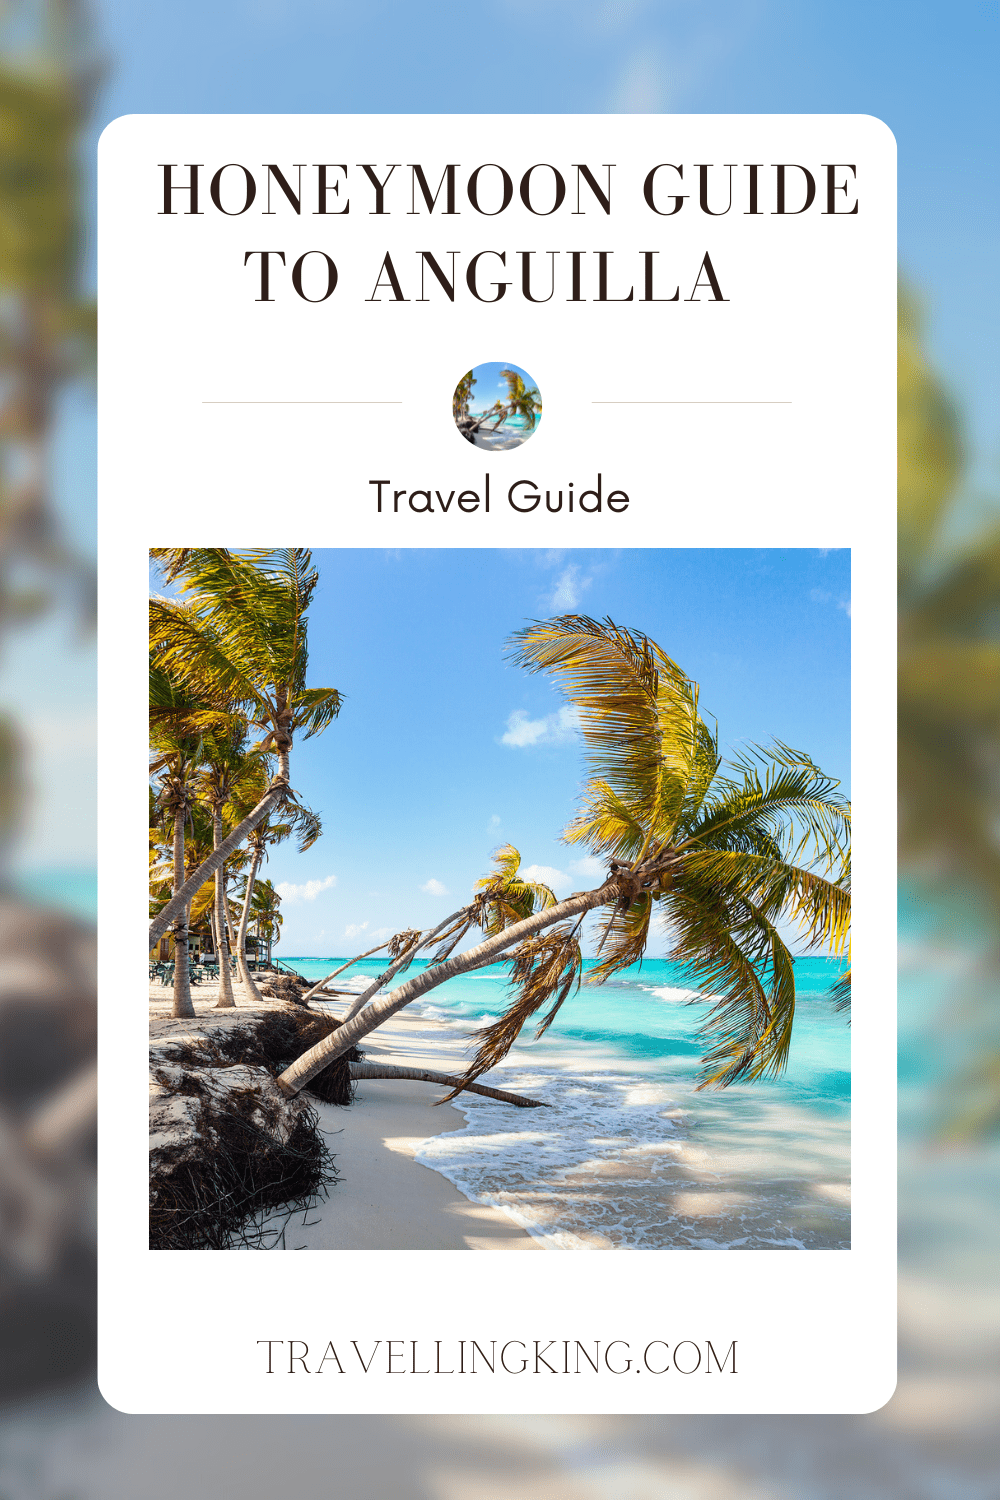 The Only Honeymoon Guide to Anguilla You’ll Ever Need!